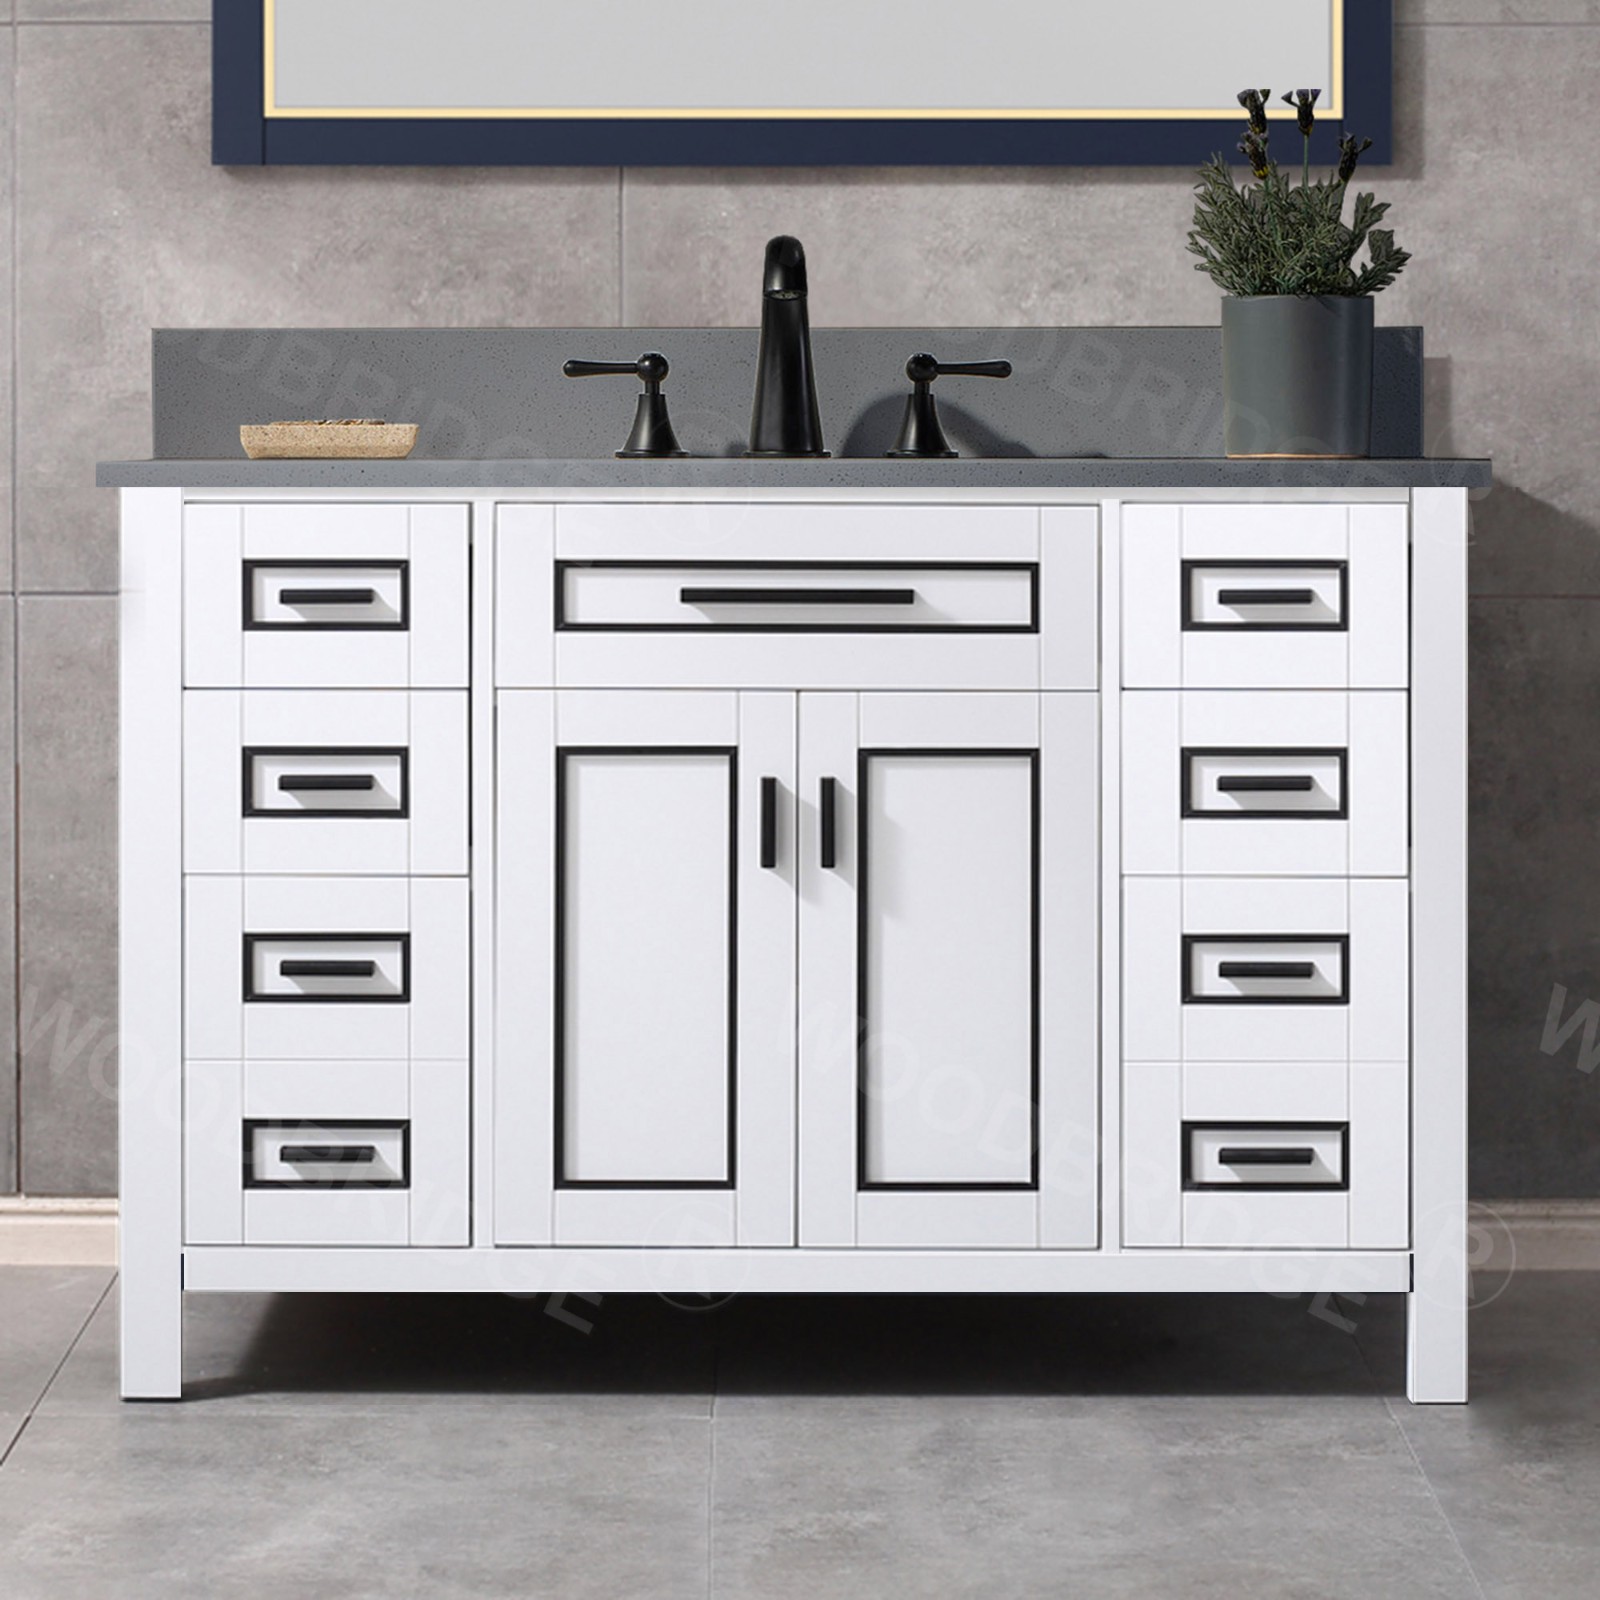  WOODBRIDGE Milan  49” Floor Mounted Single Basin Vanity Set with Solid Wood Cabinet in White and Engineered stone composite Vanity Top in Dark Gray with Pre-installed Undermount Rectangle Bathroom Sink in White and Pre-Drilled 3-Hole for 4-inch Centerset_4687